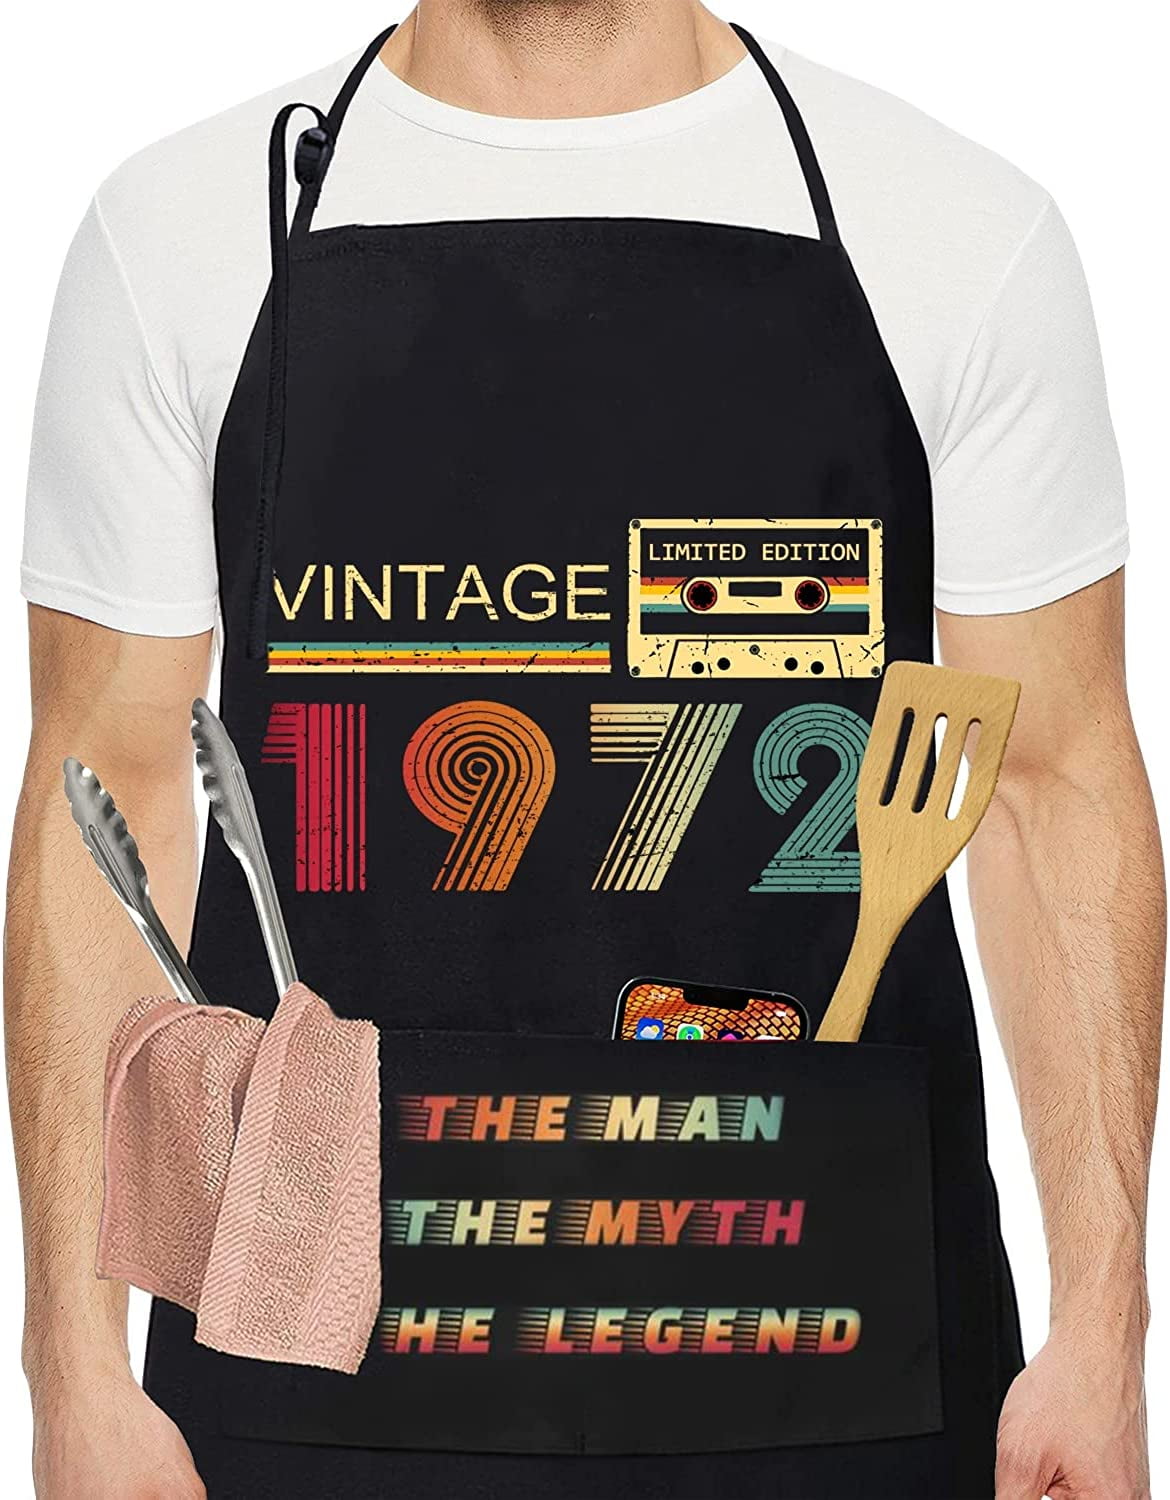 Funny BBQ Apron Novelty Aprons Cooking Gifts for Men 100% Cotton 2